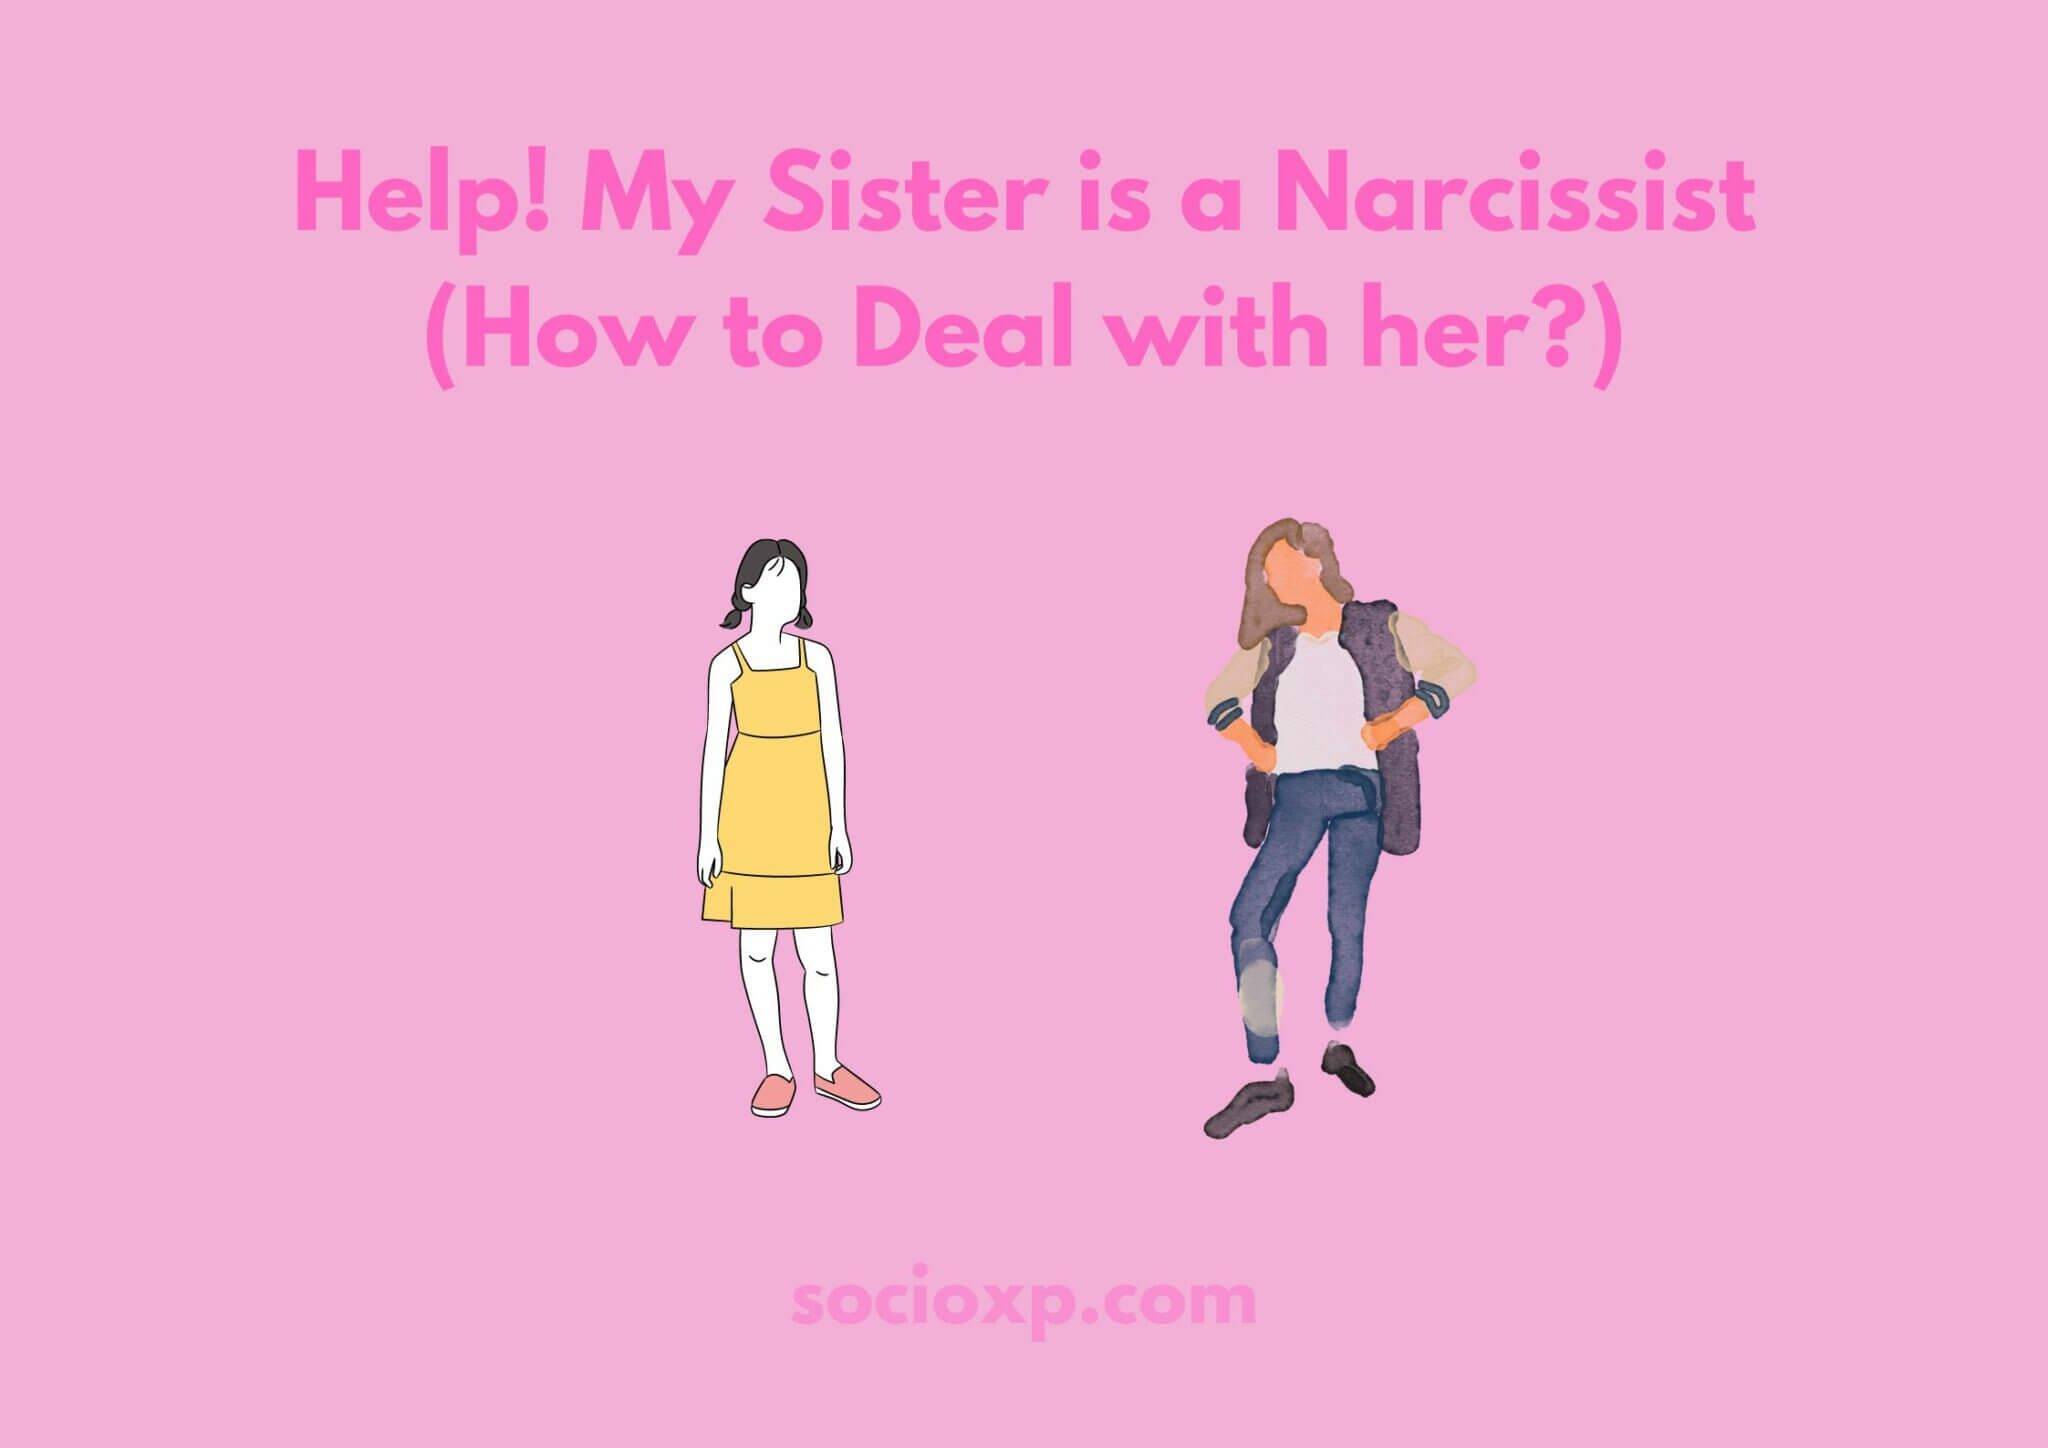 Help! My Sister is a Narcissist (How to Deal with her?)